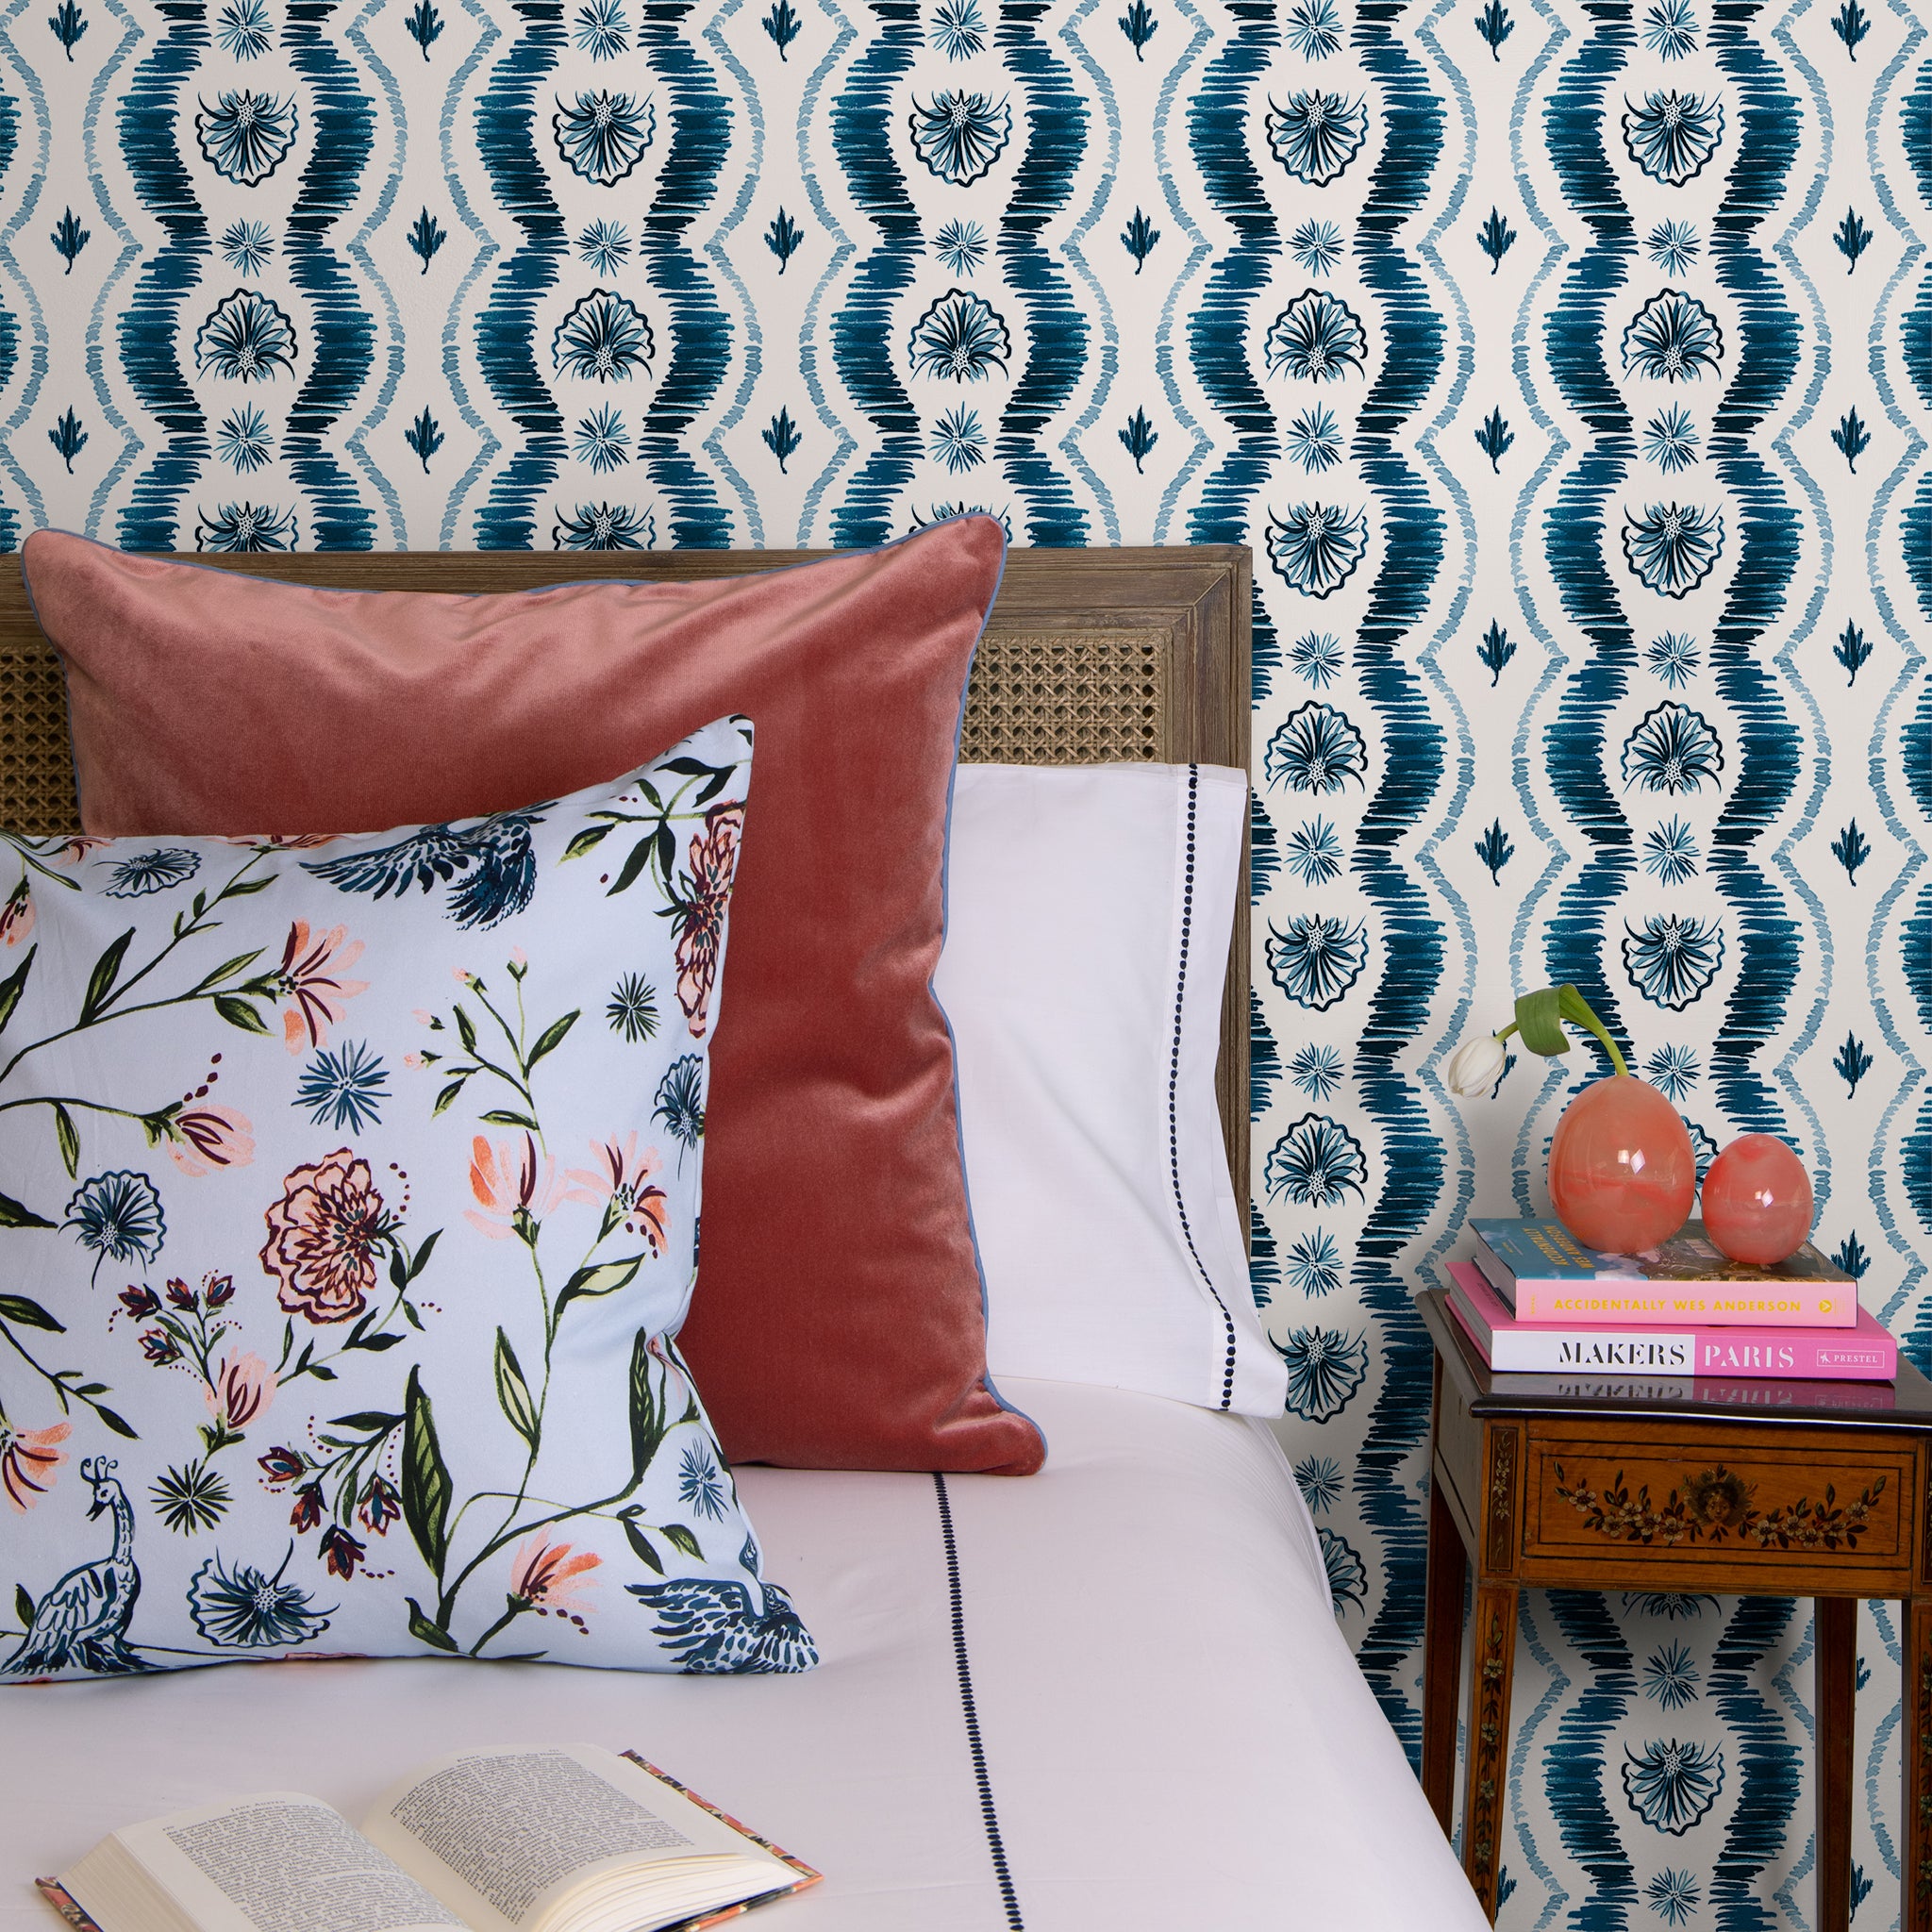 Blue Ikat Striped Pattern Wallpaper behind bed with one coral pillow, one daphne powder pillow, and a book next to a night stand with books and flower vase 